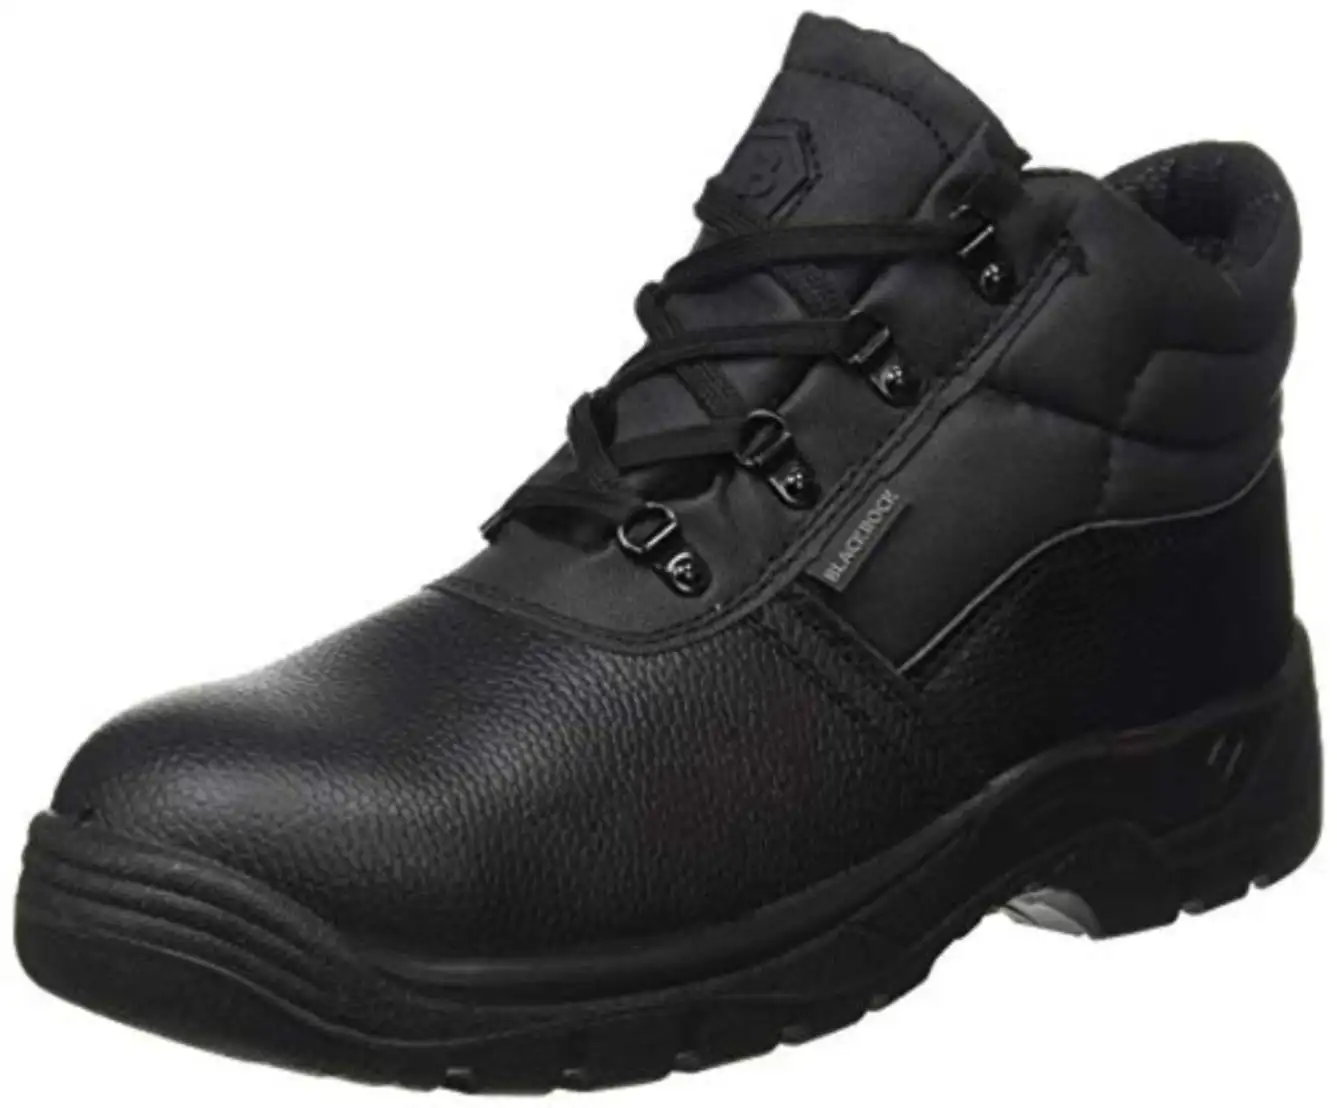 Blackrock Black Leather Work Safety Chukka Boots With Steel Toe Capss And Midsole safety shoe